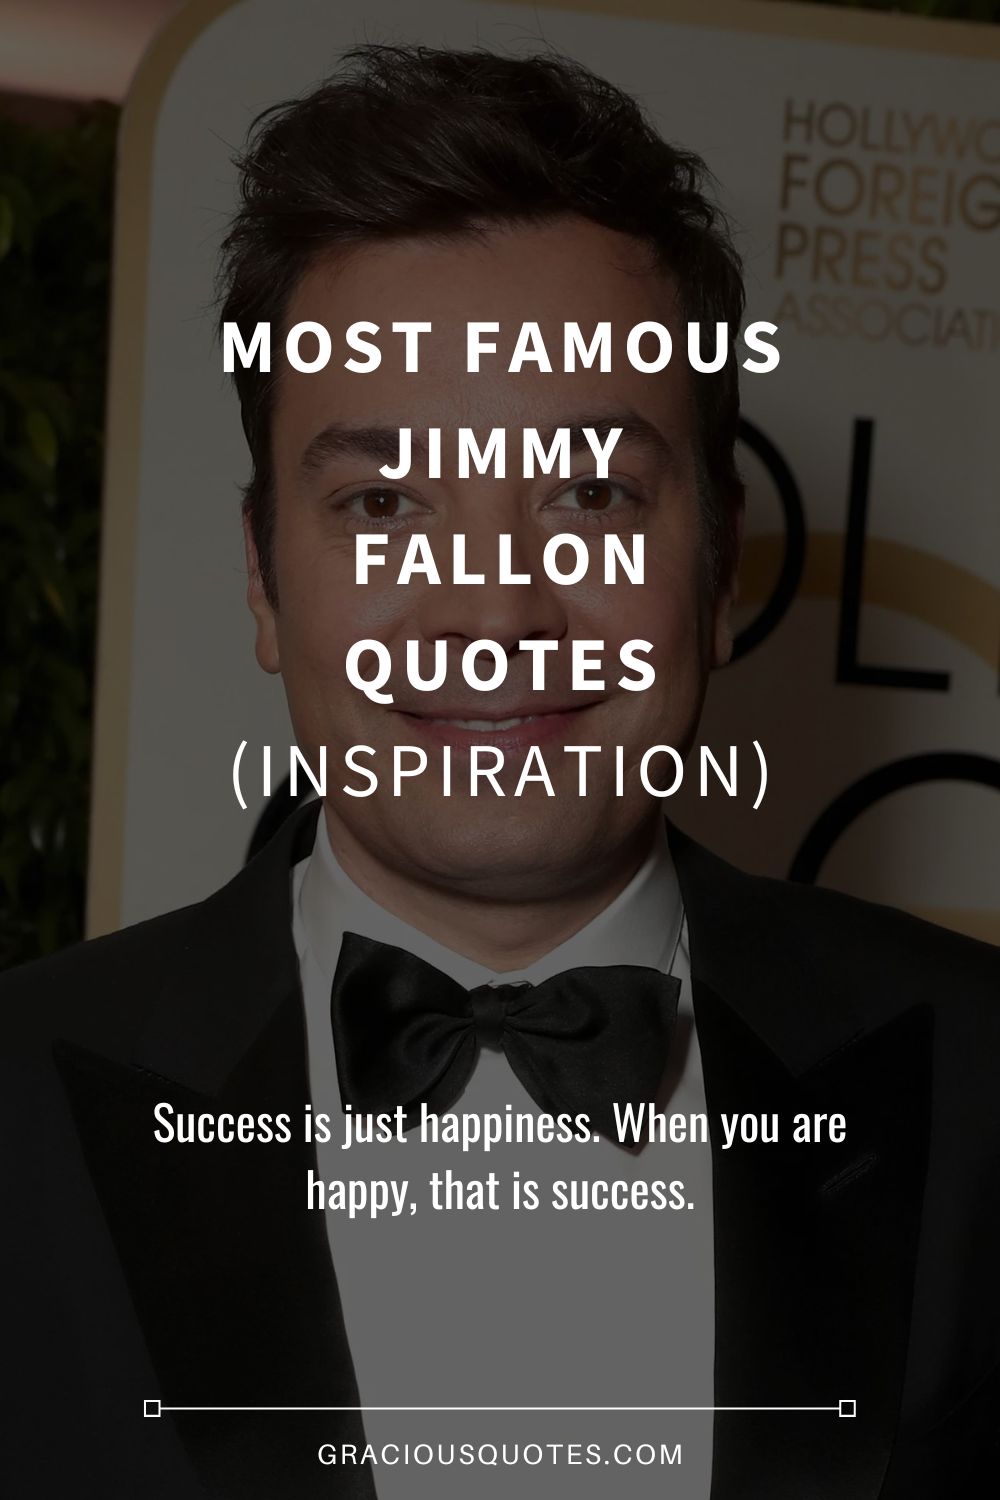 Most Famous Jimmy Fallon Quotes (INSPIRATION) - Gracious Quotes